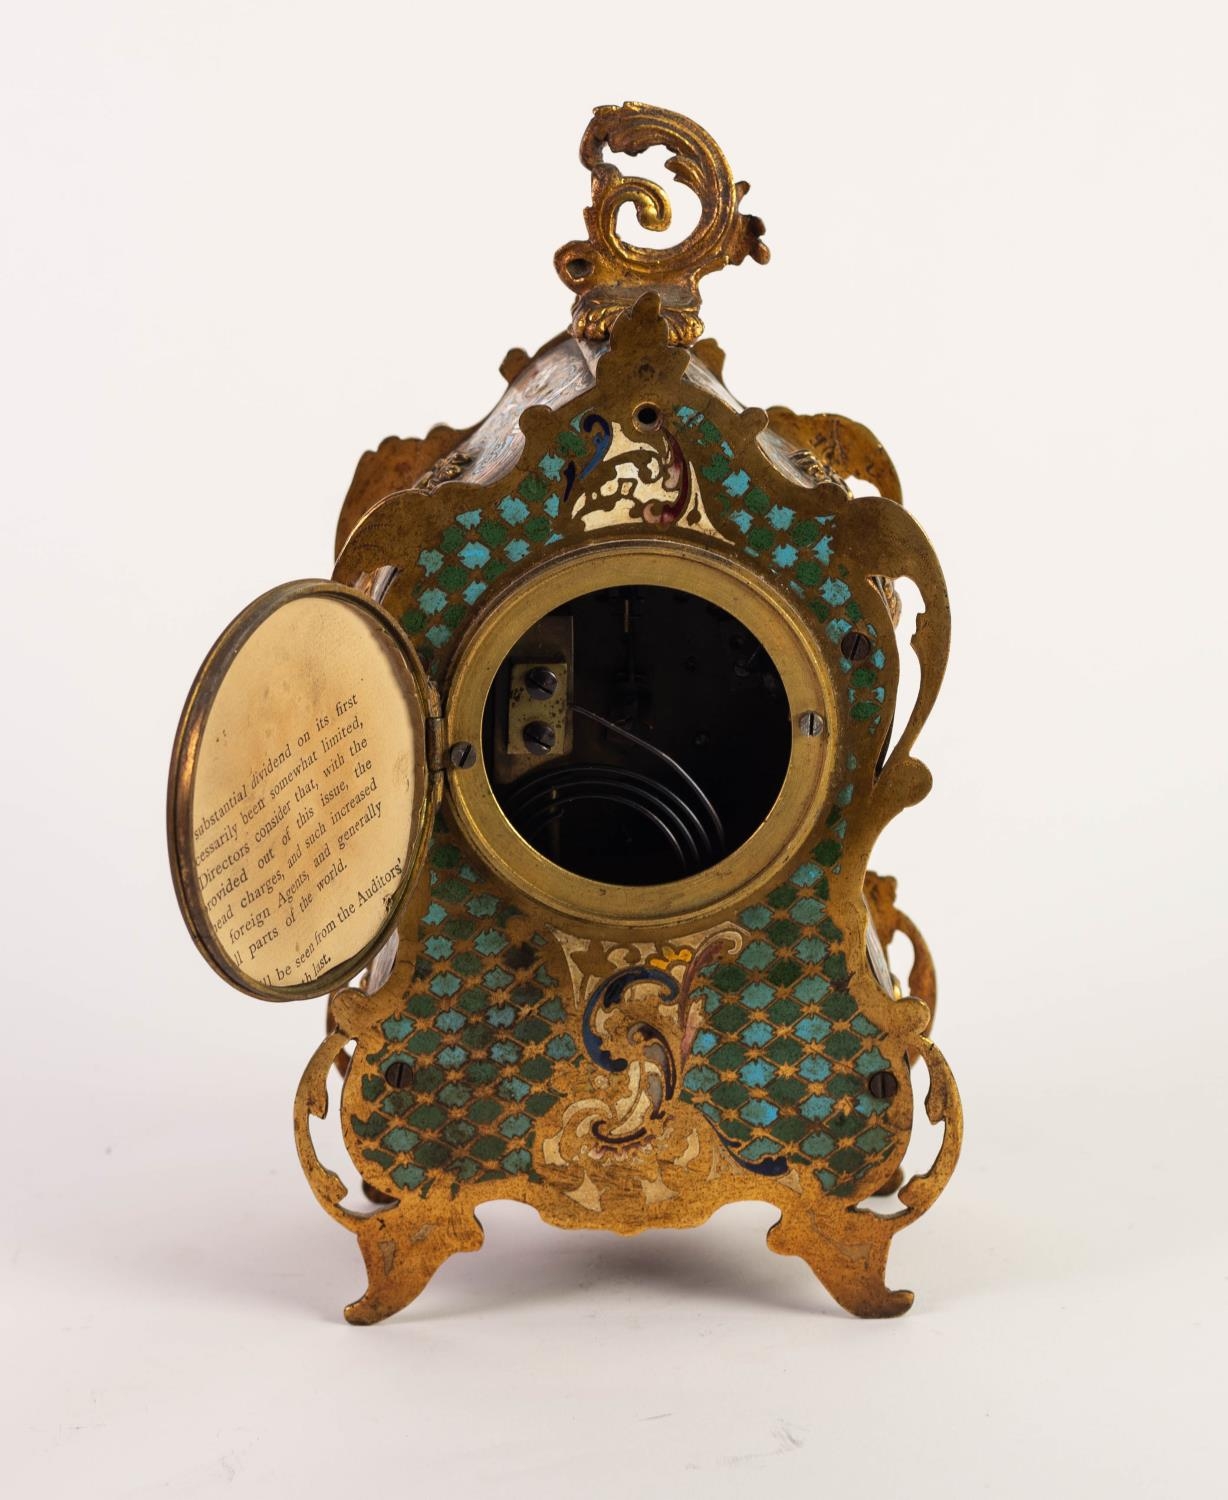 CIRCA 1900 FRENCH GILT METAL AND CHAMPLEVE ENAMEL ROCOCO REVIVAL CASED MANTEL CLOCK, the movement by - Image 8 of 8